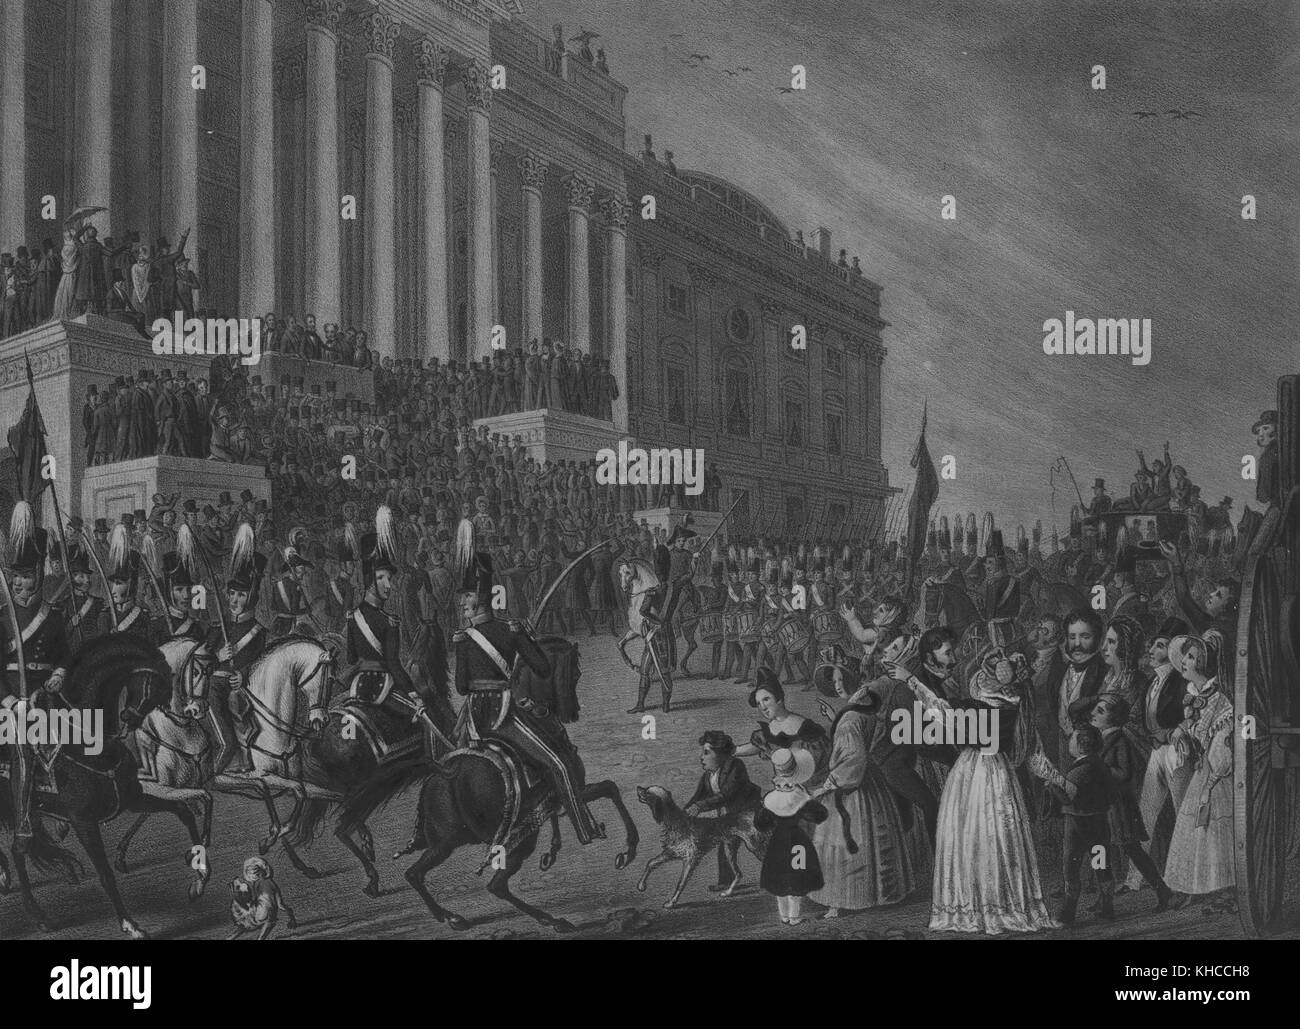 Lithograph of the Presidential inauguration of William Henry Harrison, in Washington, DC on the 4th of March 1841, Washington, DC, 1841. From the New York Public Library. Stock Photo